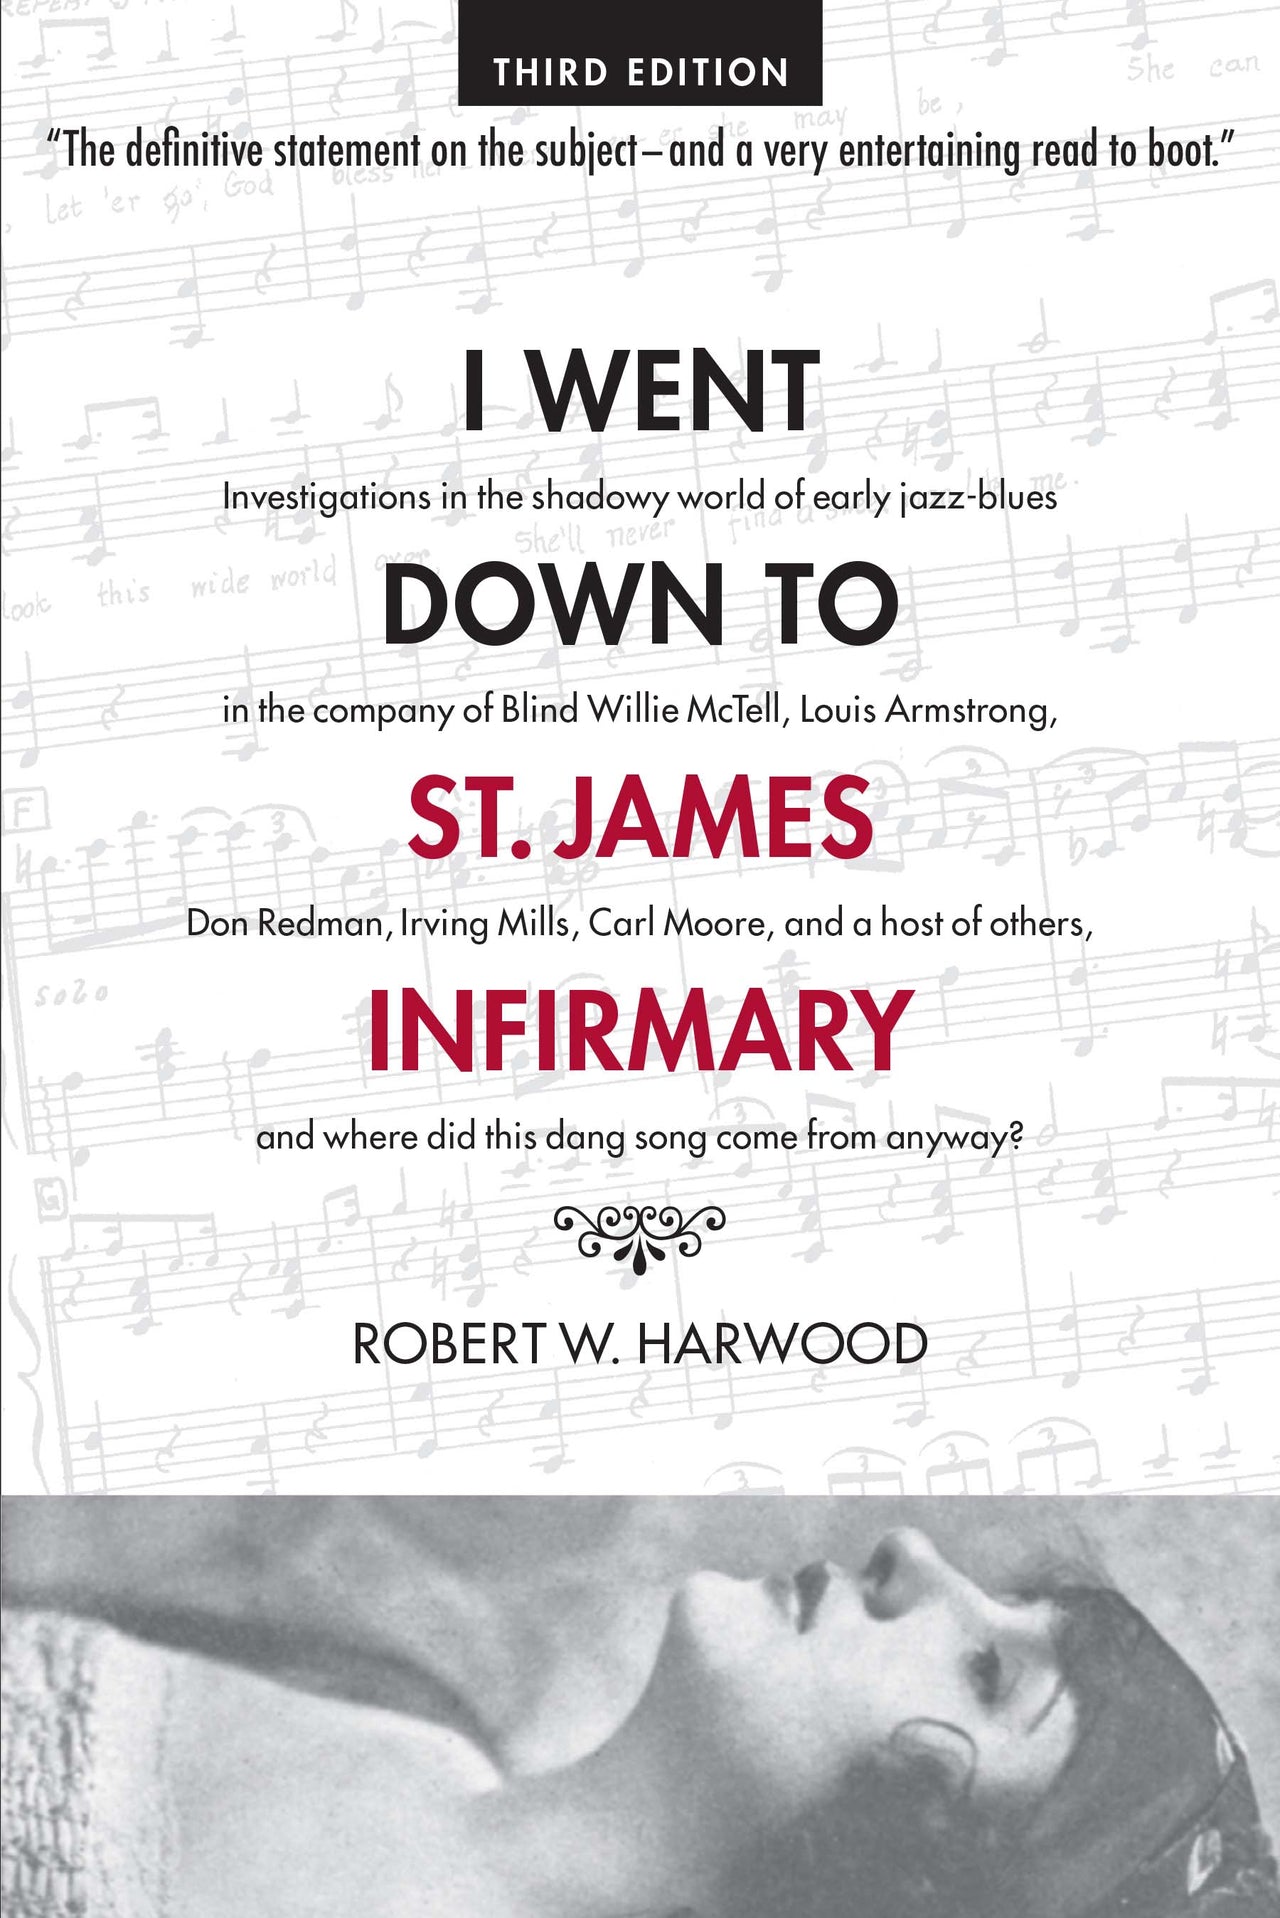 I Went Down To St. James Infirmary